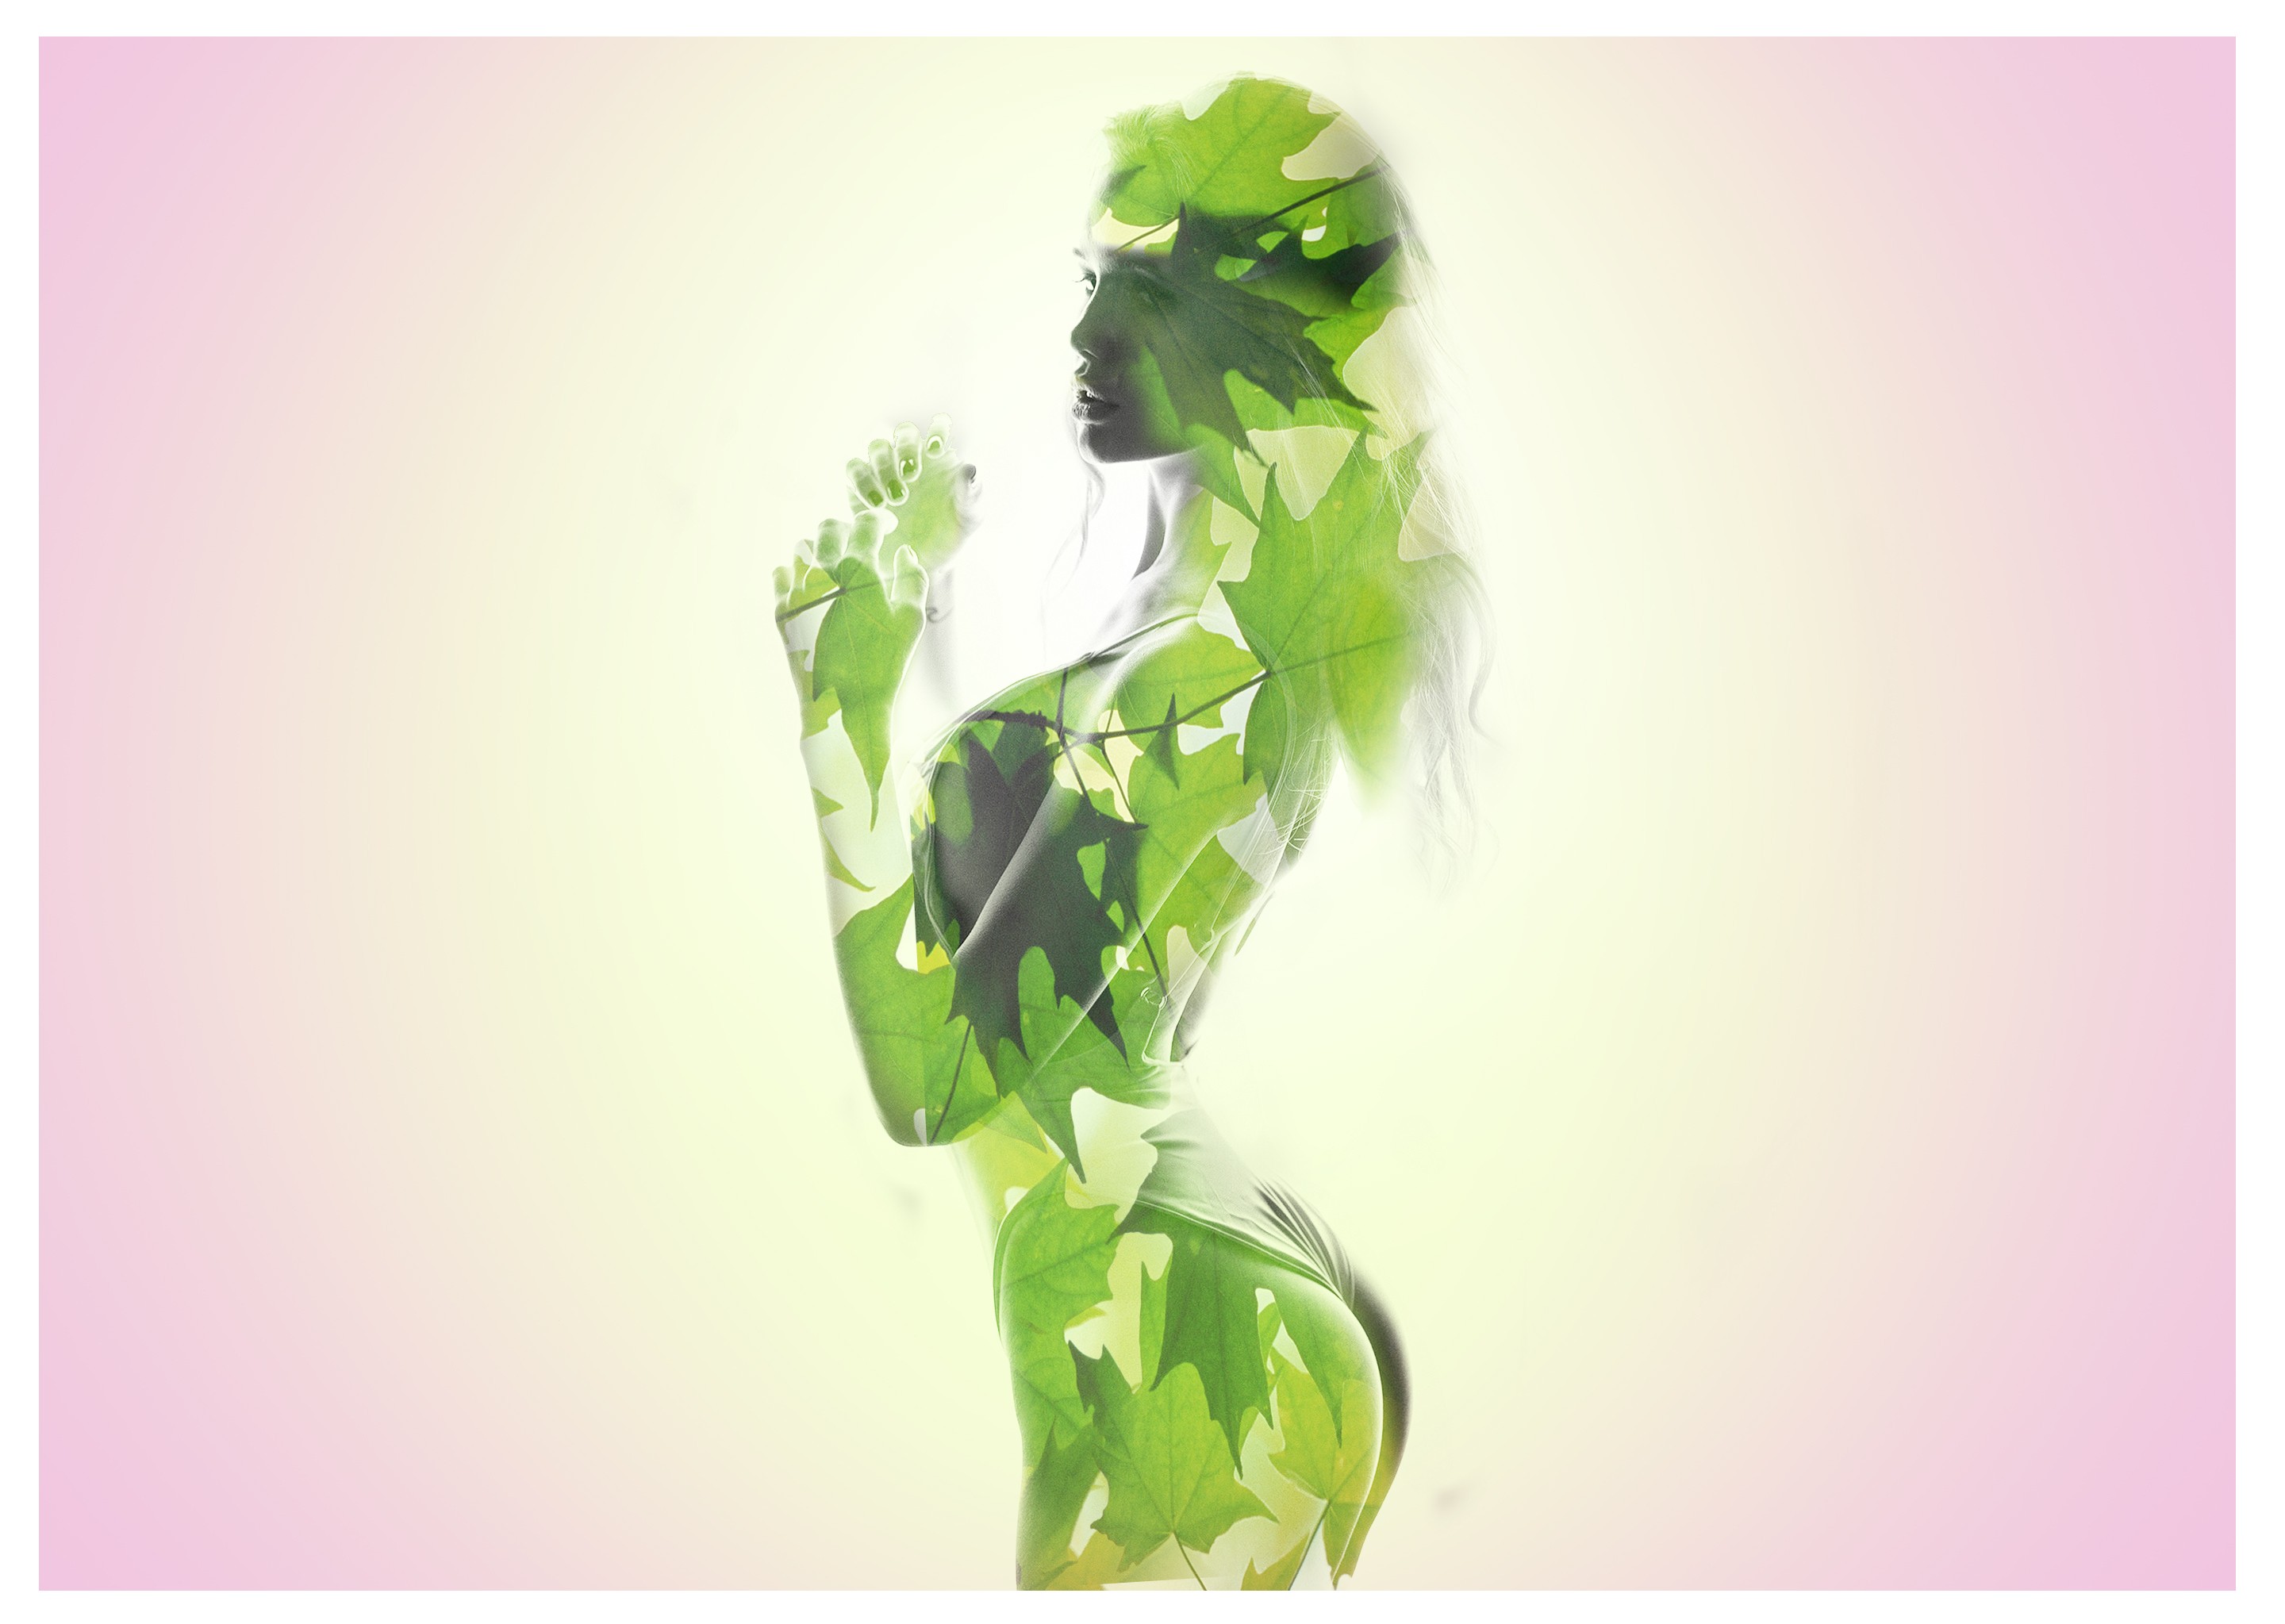 General 2880x2047 photoshopped leaves double exposure women green simple background digital art frame